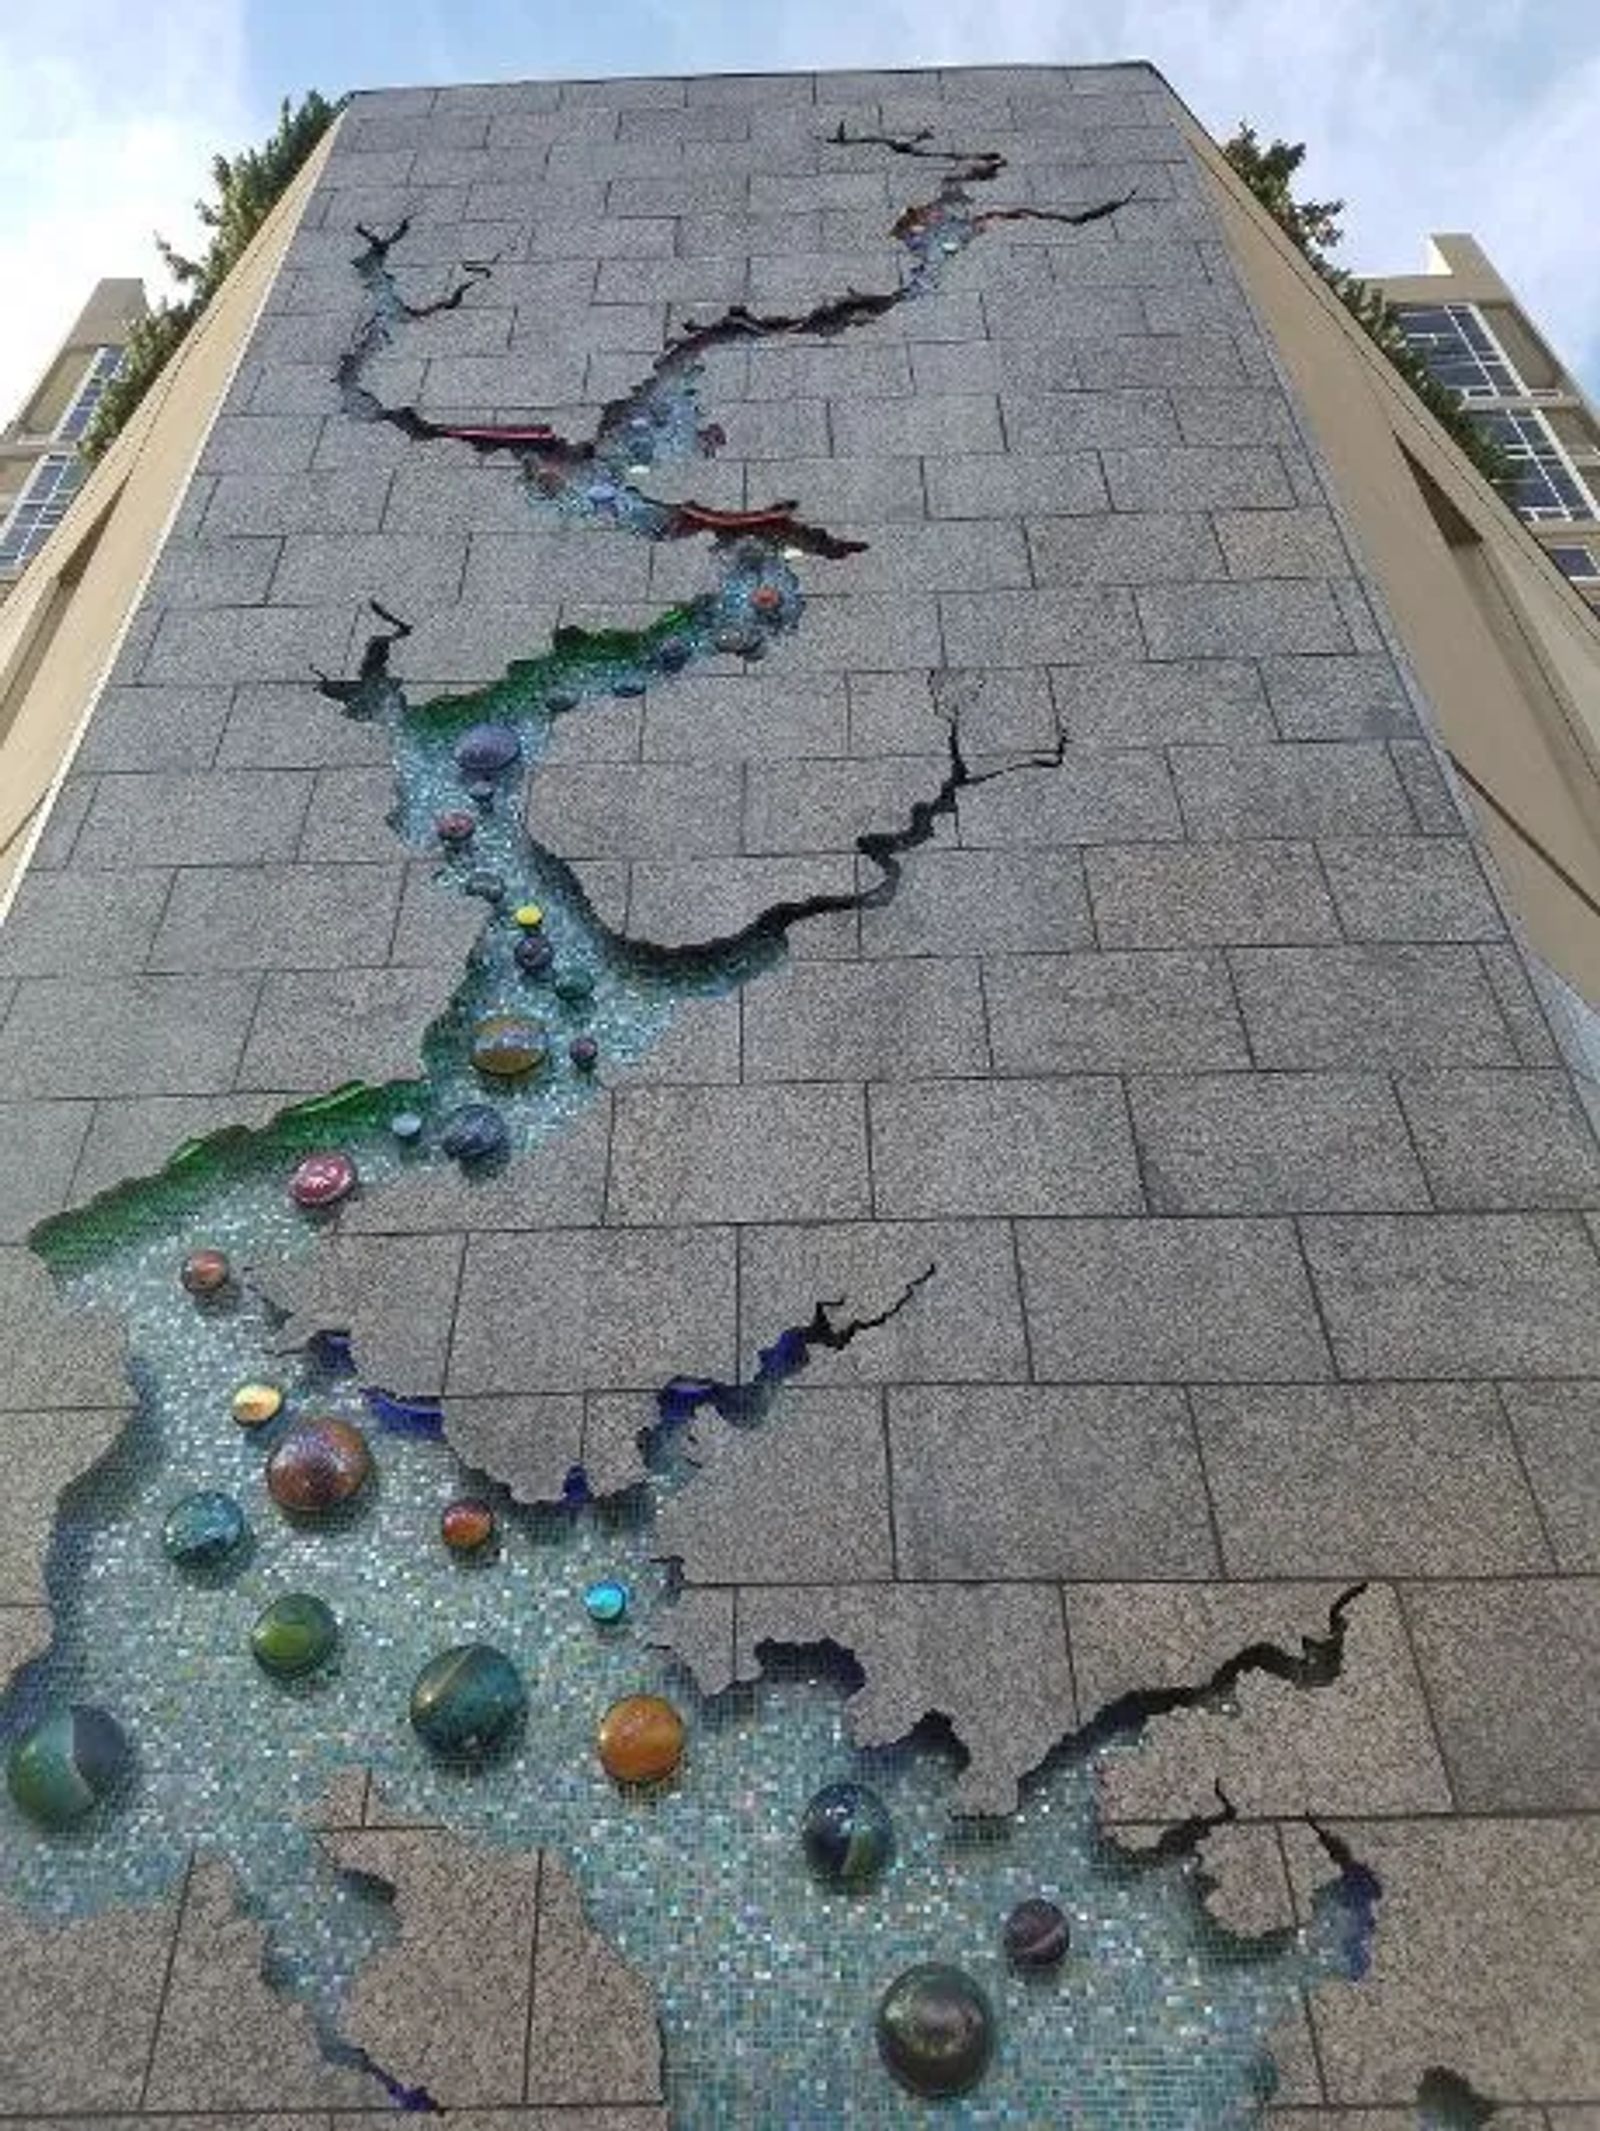 Photo of a River Sculpture in Boise, Idaho